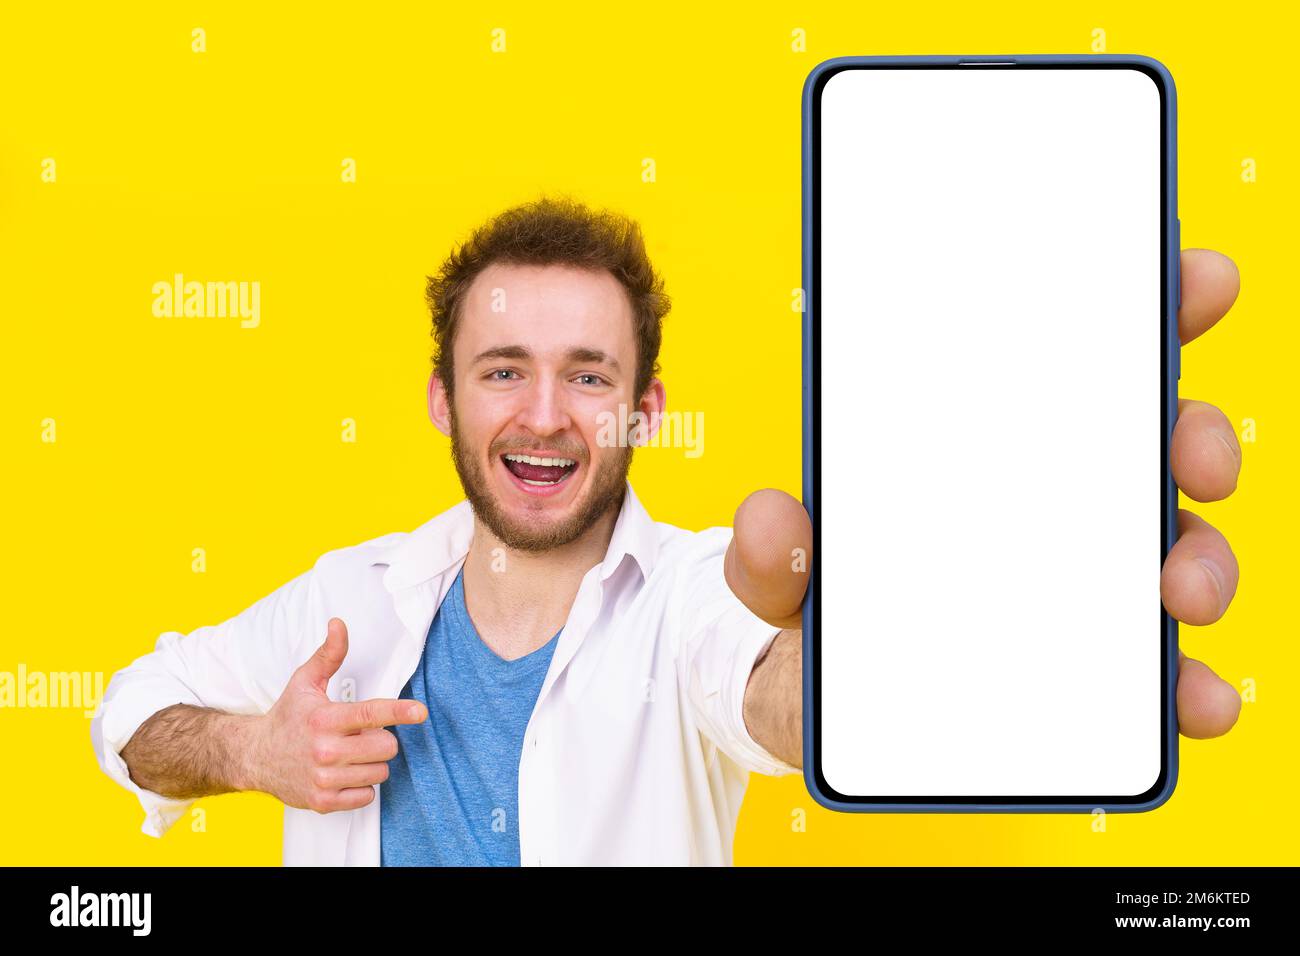 Check this app young man pointing at smartphone showing a white empty screen game, bet, lottery win isolated over yellow backgro Stock Photo